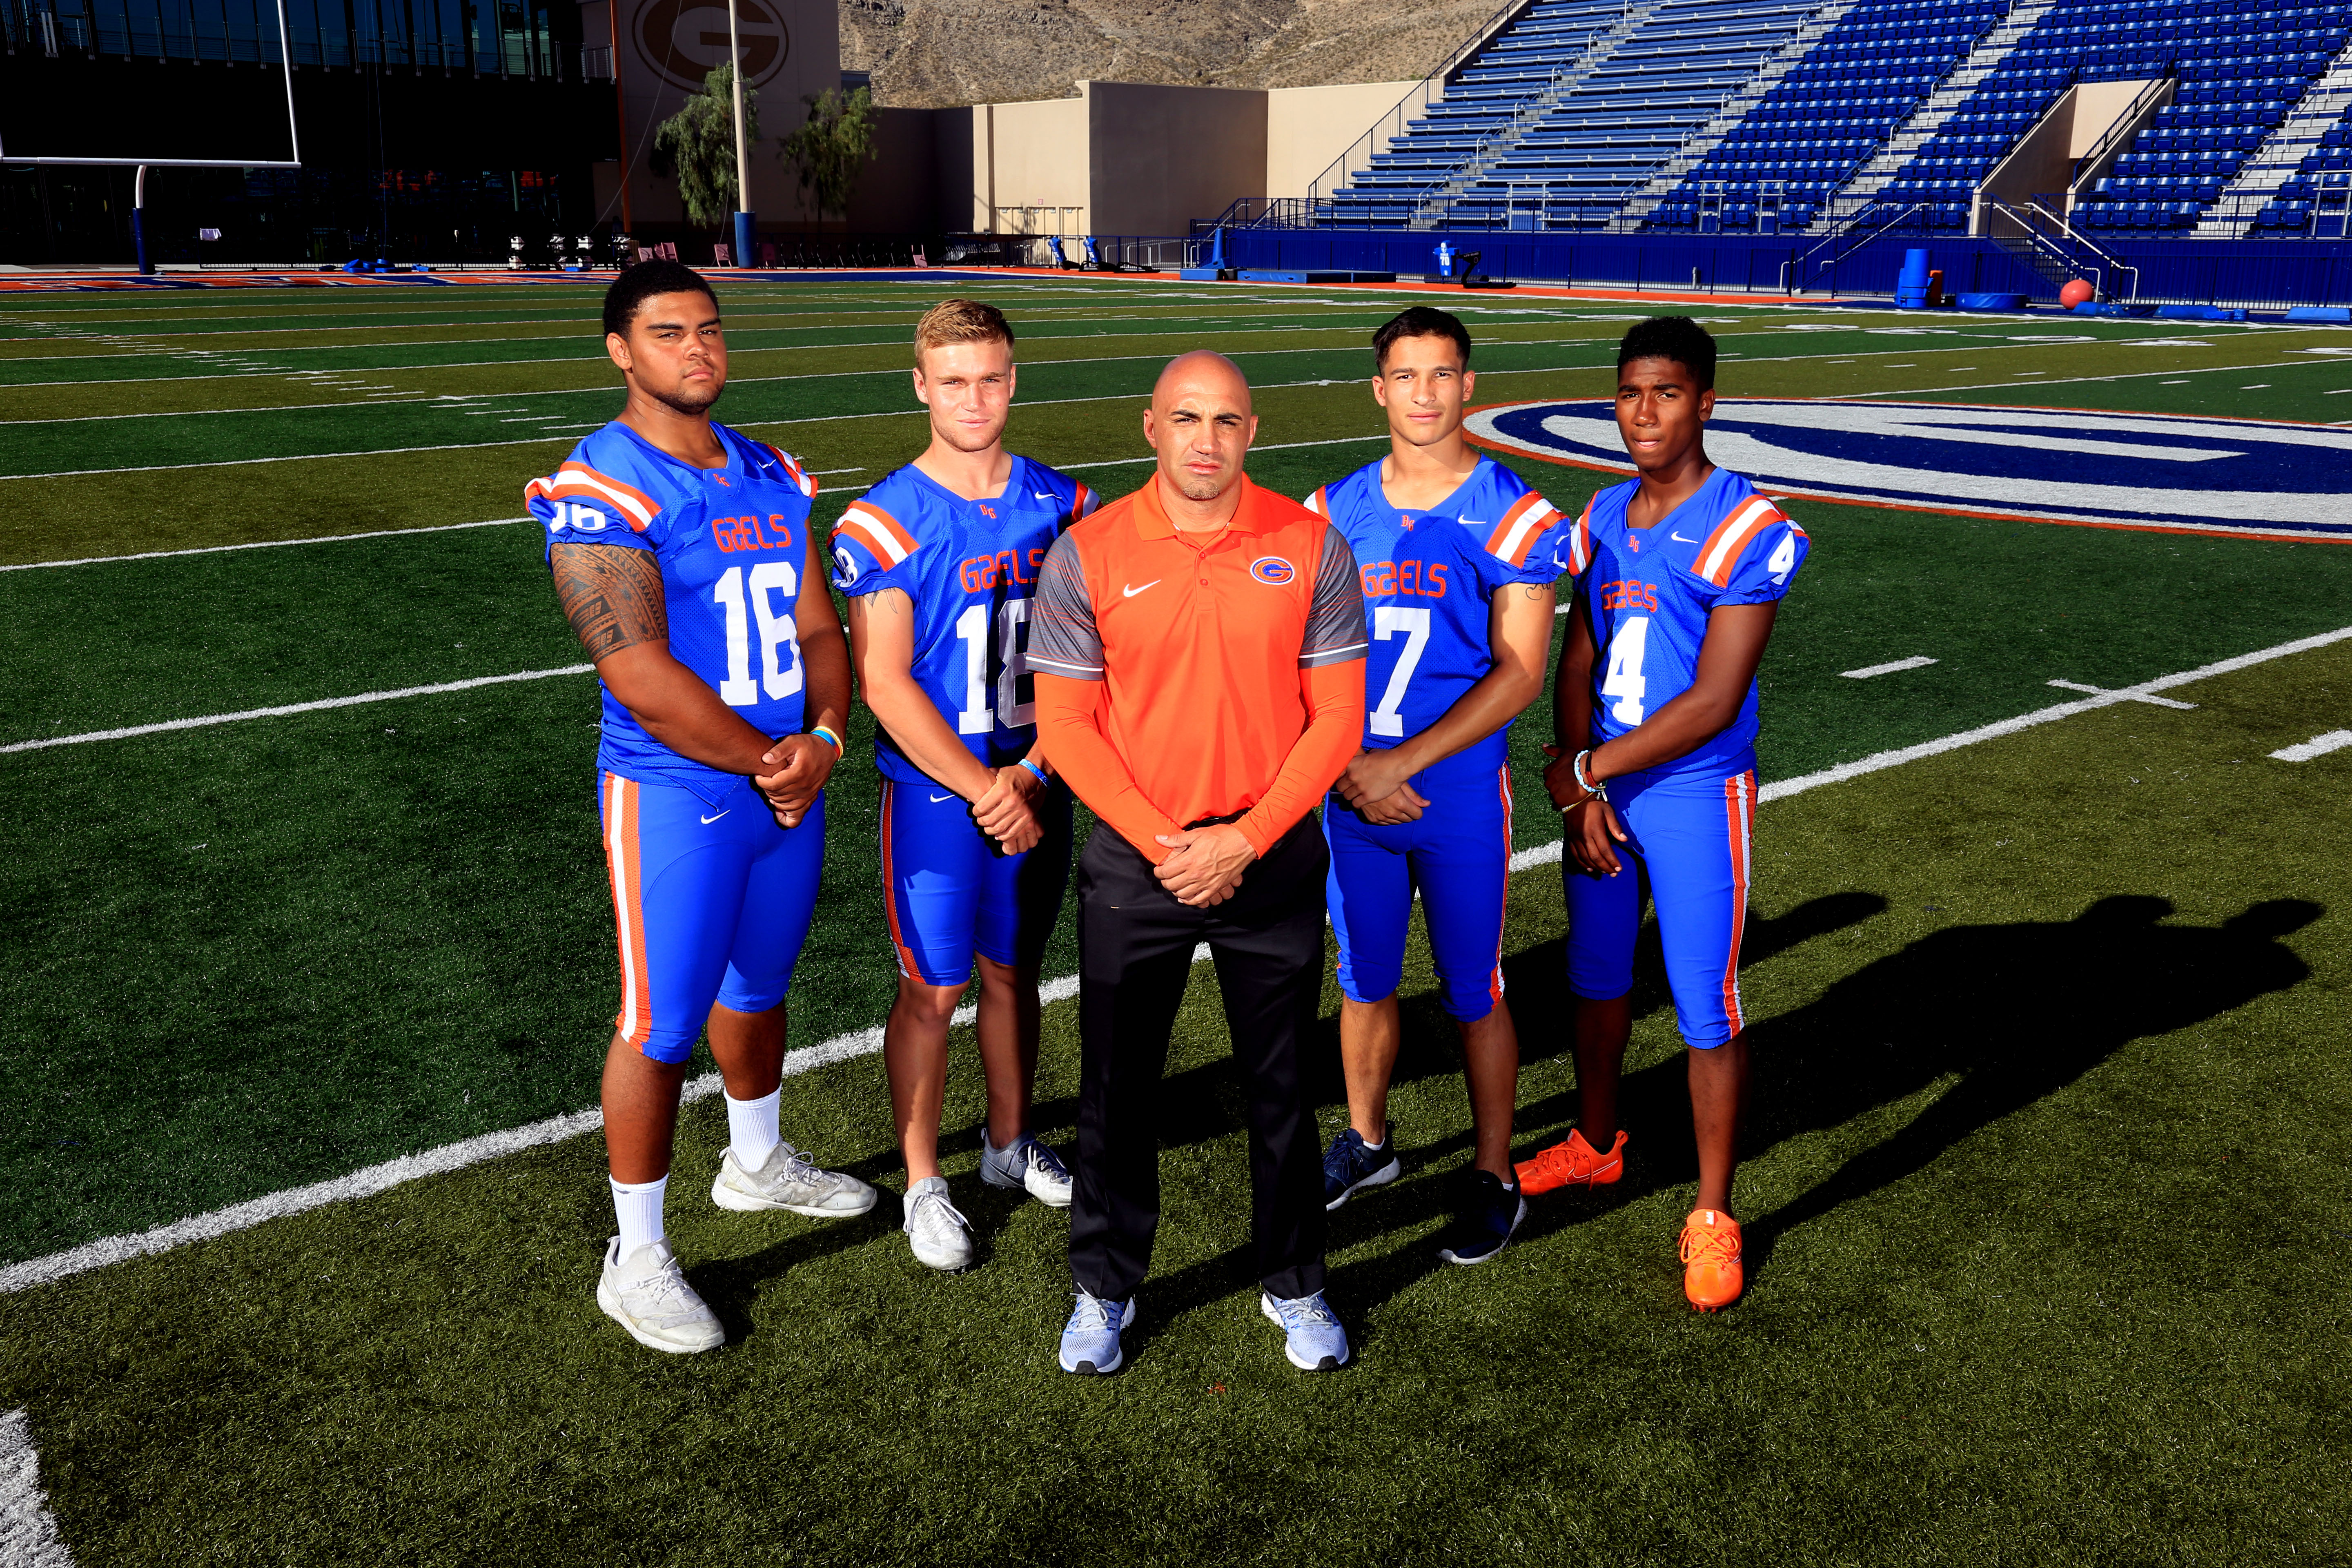 Bishop Gorman coach Kenny Sanchez surrounded by (from left), Haskell Garrett, Tate Martell, Biaggio Ali Walsh and Alex Perry (Photo: Greg Cava)